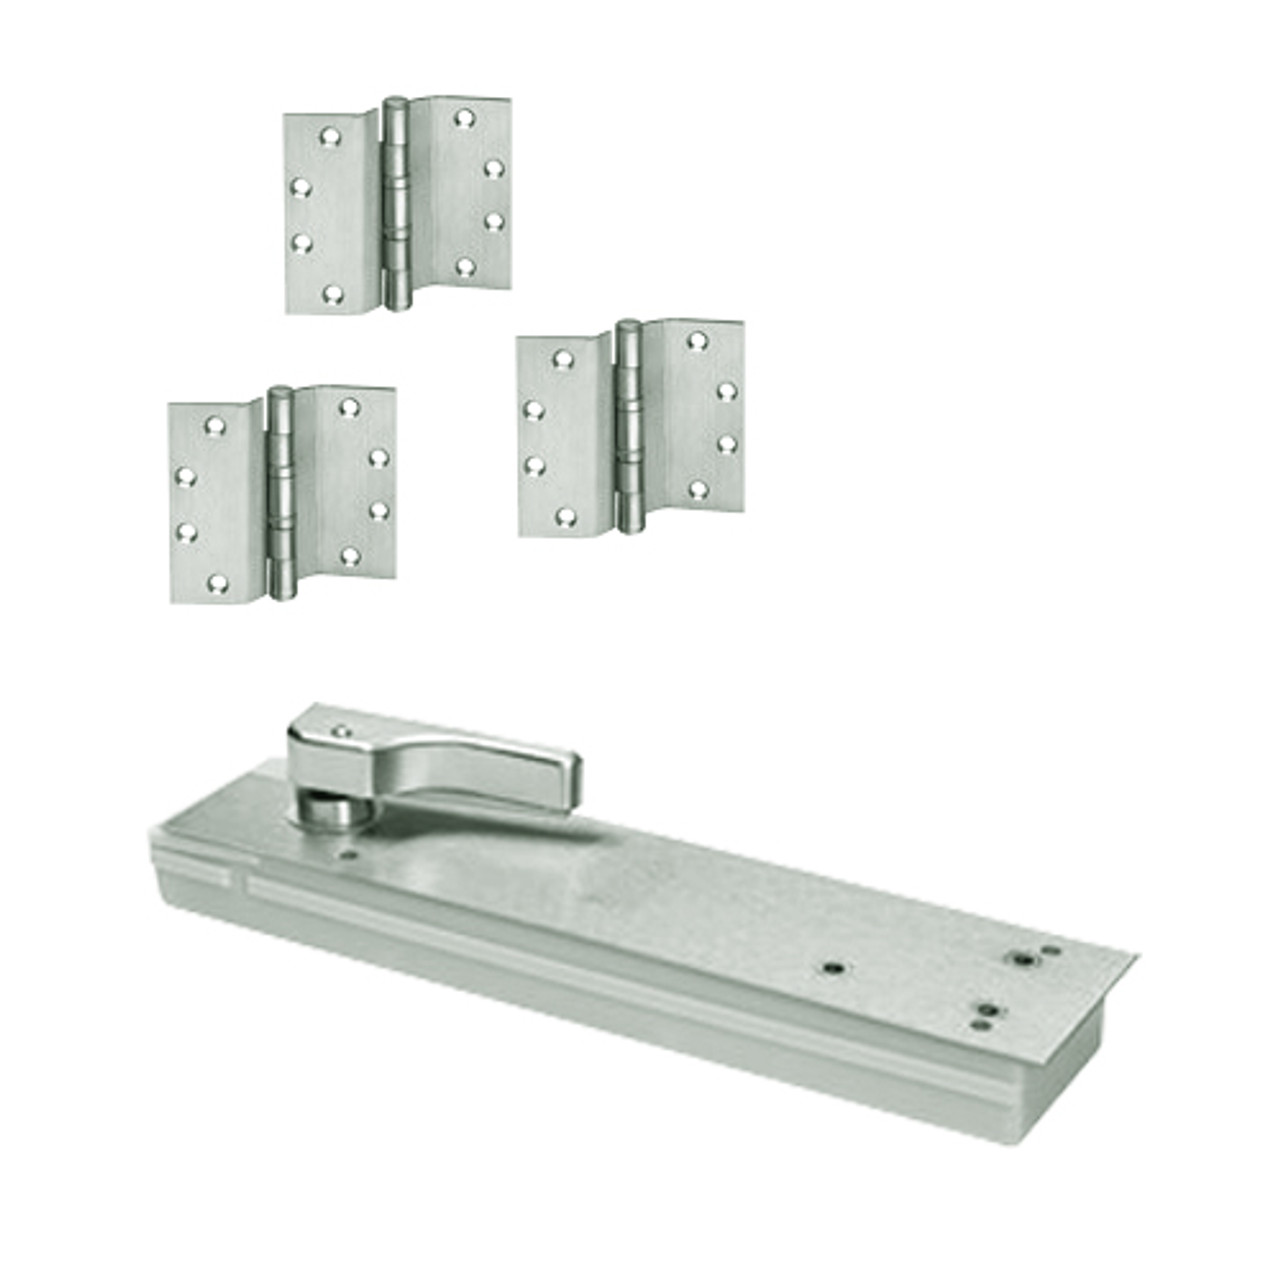 HM5103ABC105-RH-618 Rixson HM51 Series 3/4" Offset Hung Shallow Depth Floor Closers in Bright Nickel Finish